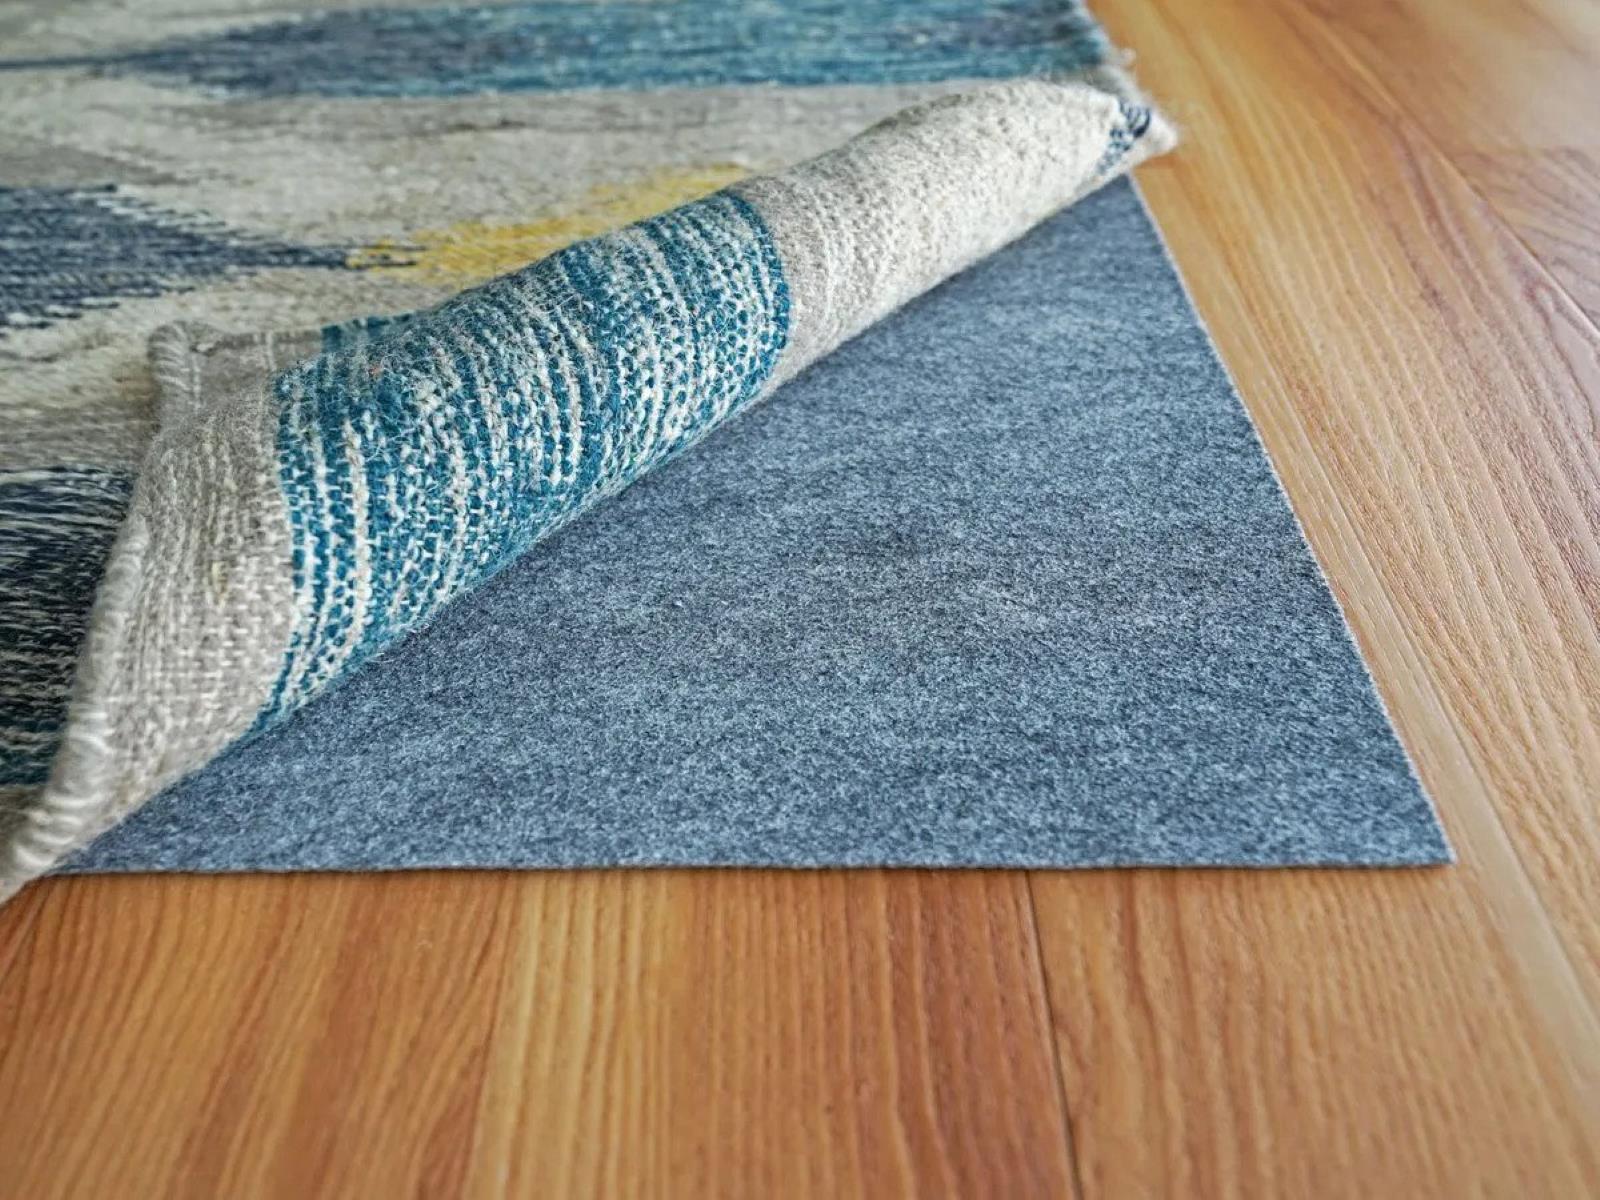 How do I stop a rug that is under my bed from bunching up?